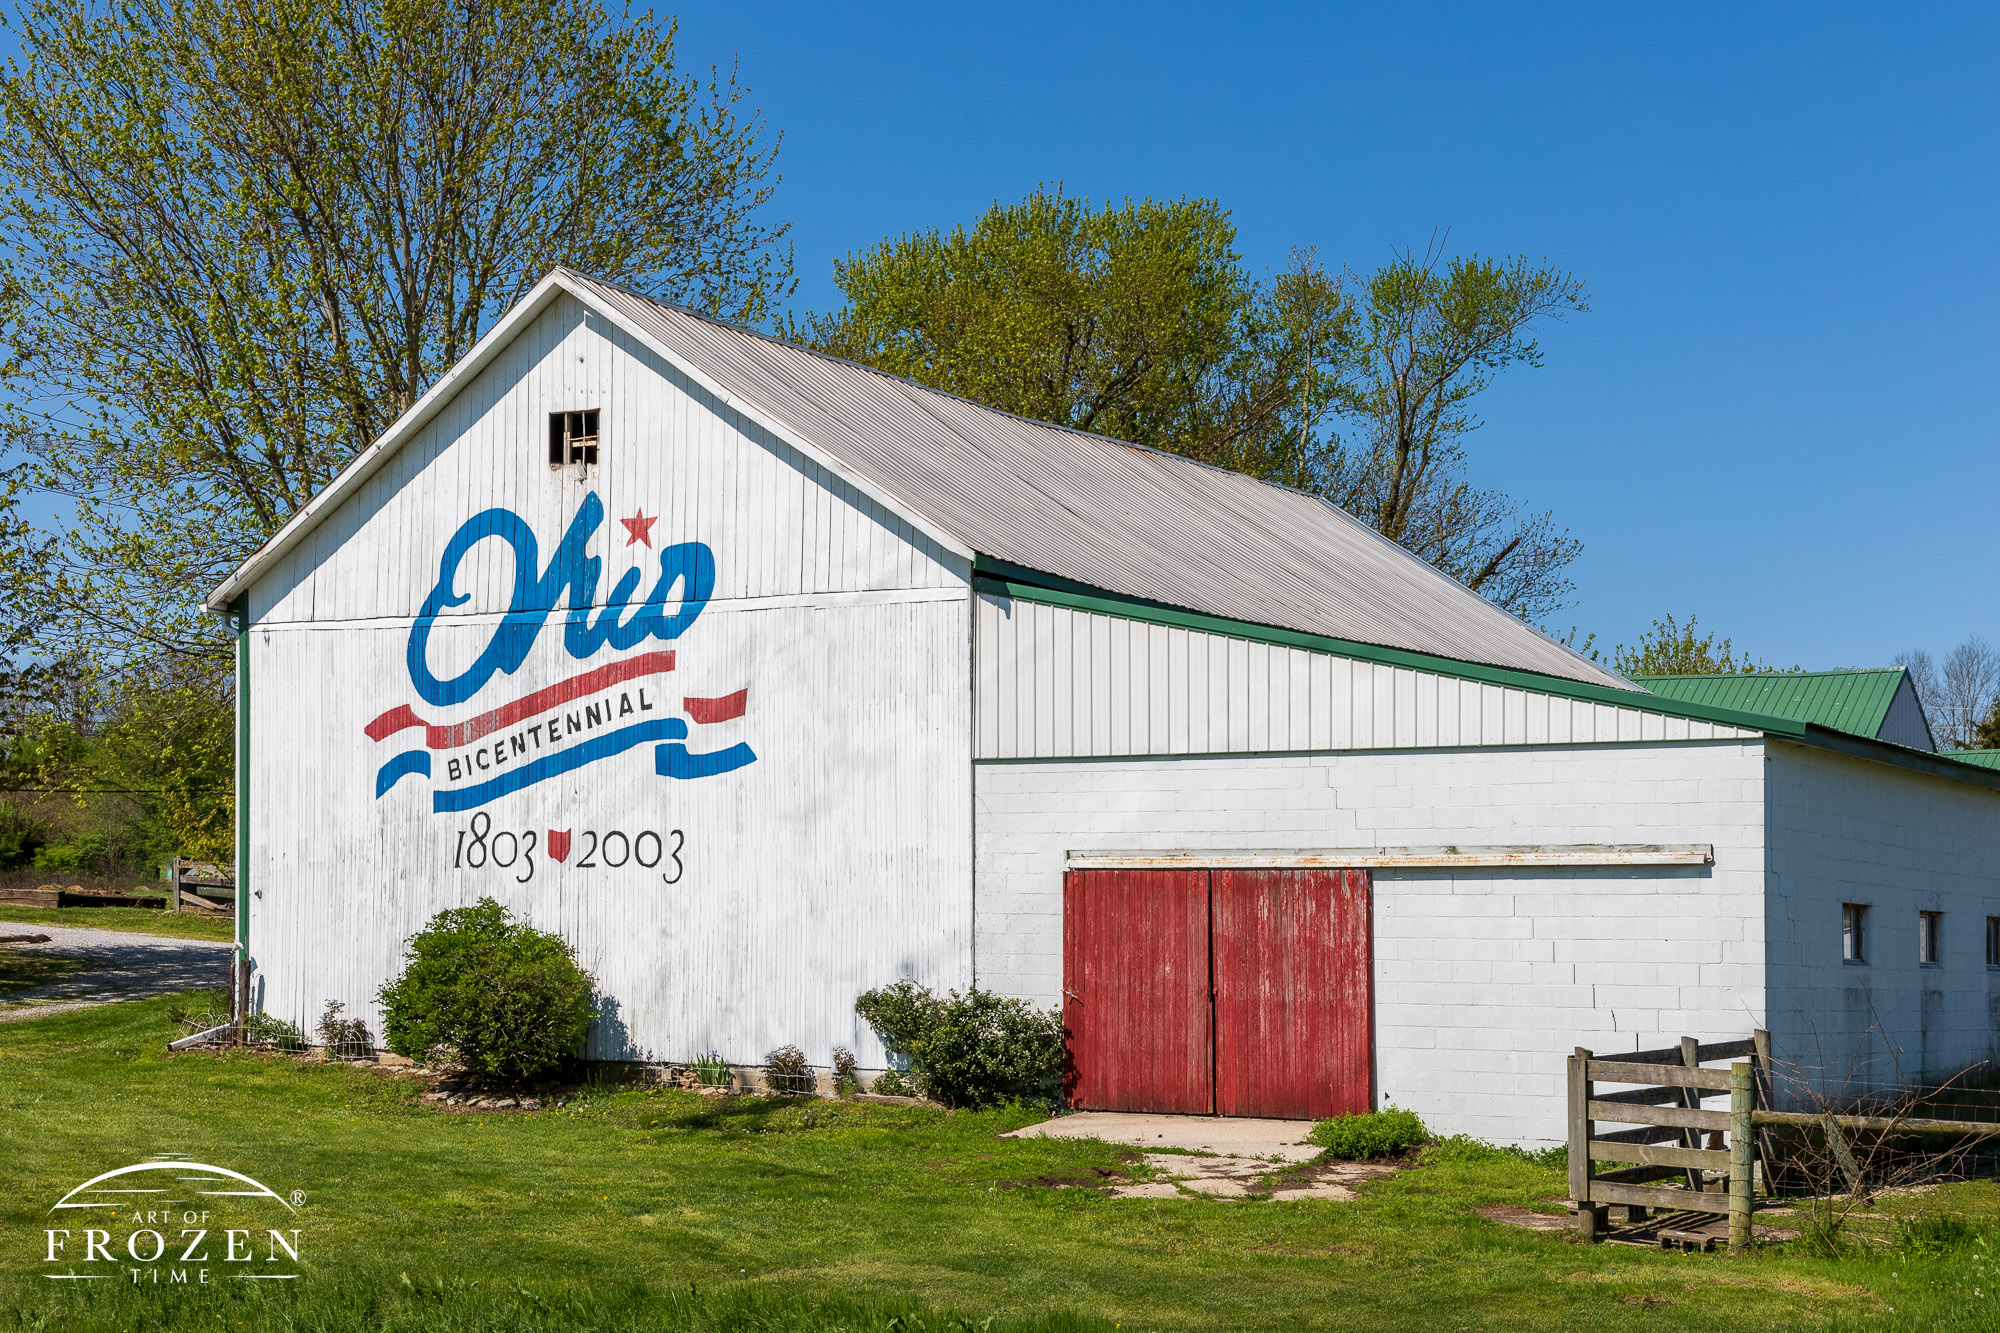 A well-maintained barn in Butler County Ohio with logo celebrating Ohio’s Bicentennial